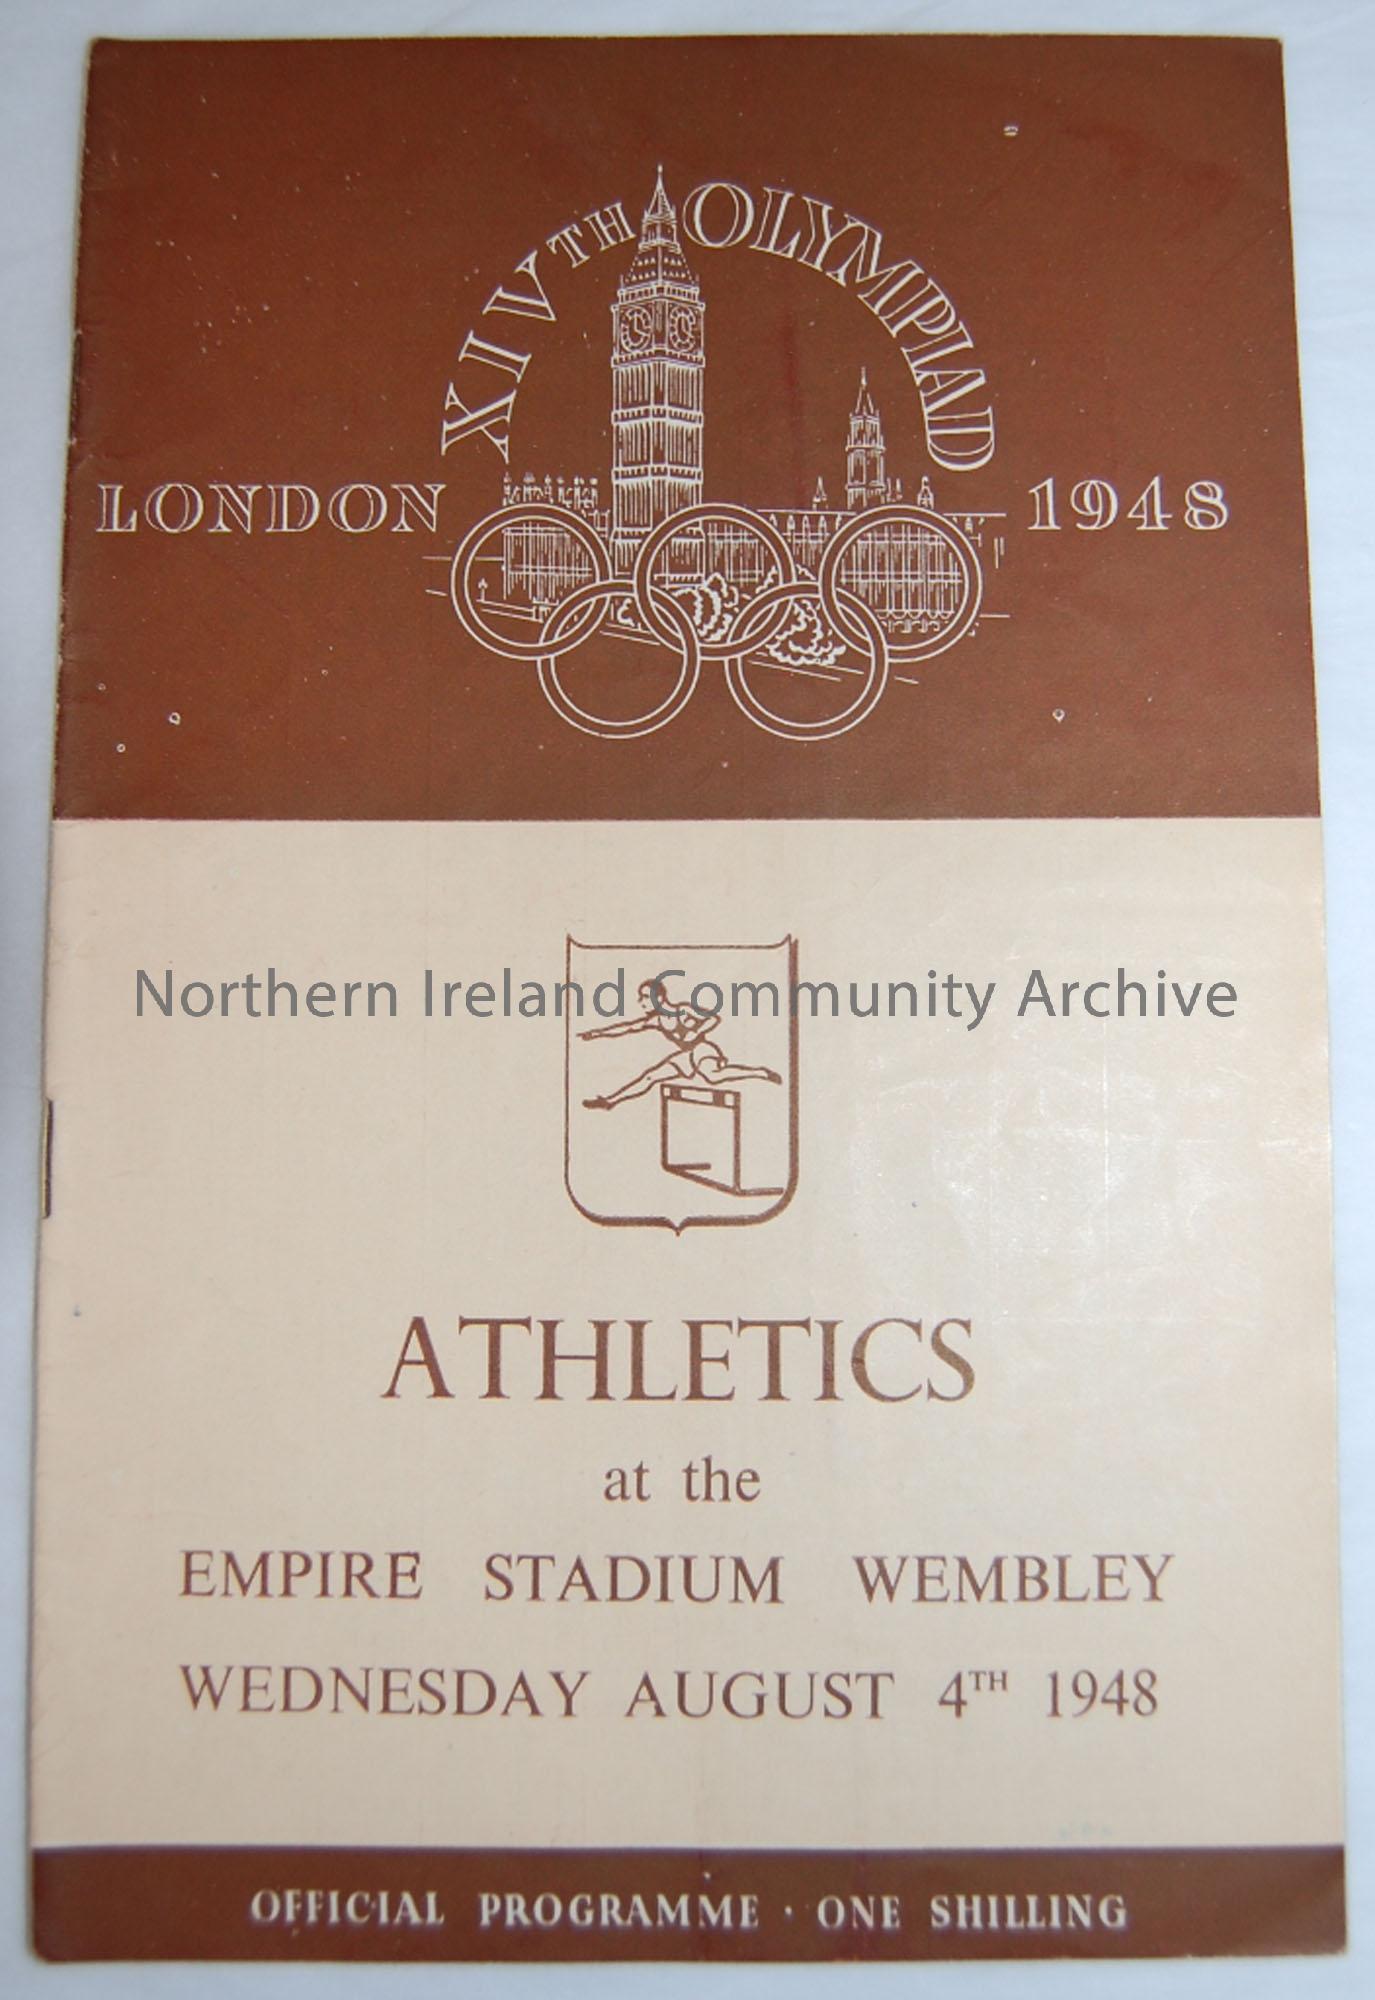 Athletics Programme from London Olympics, Empire Stadium Wembley, Wednesday August 4th 1948. Illustrations include Olympic Rings and Houses of Parliam…